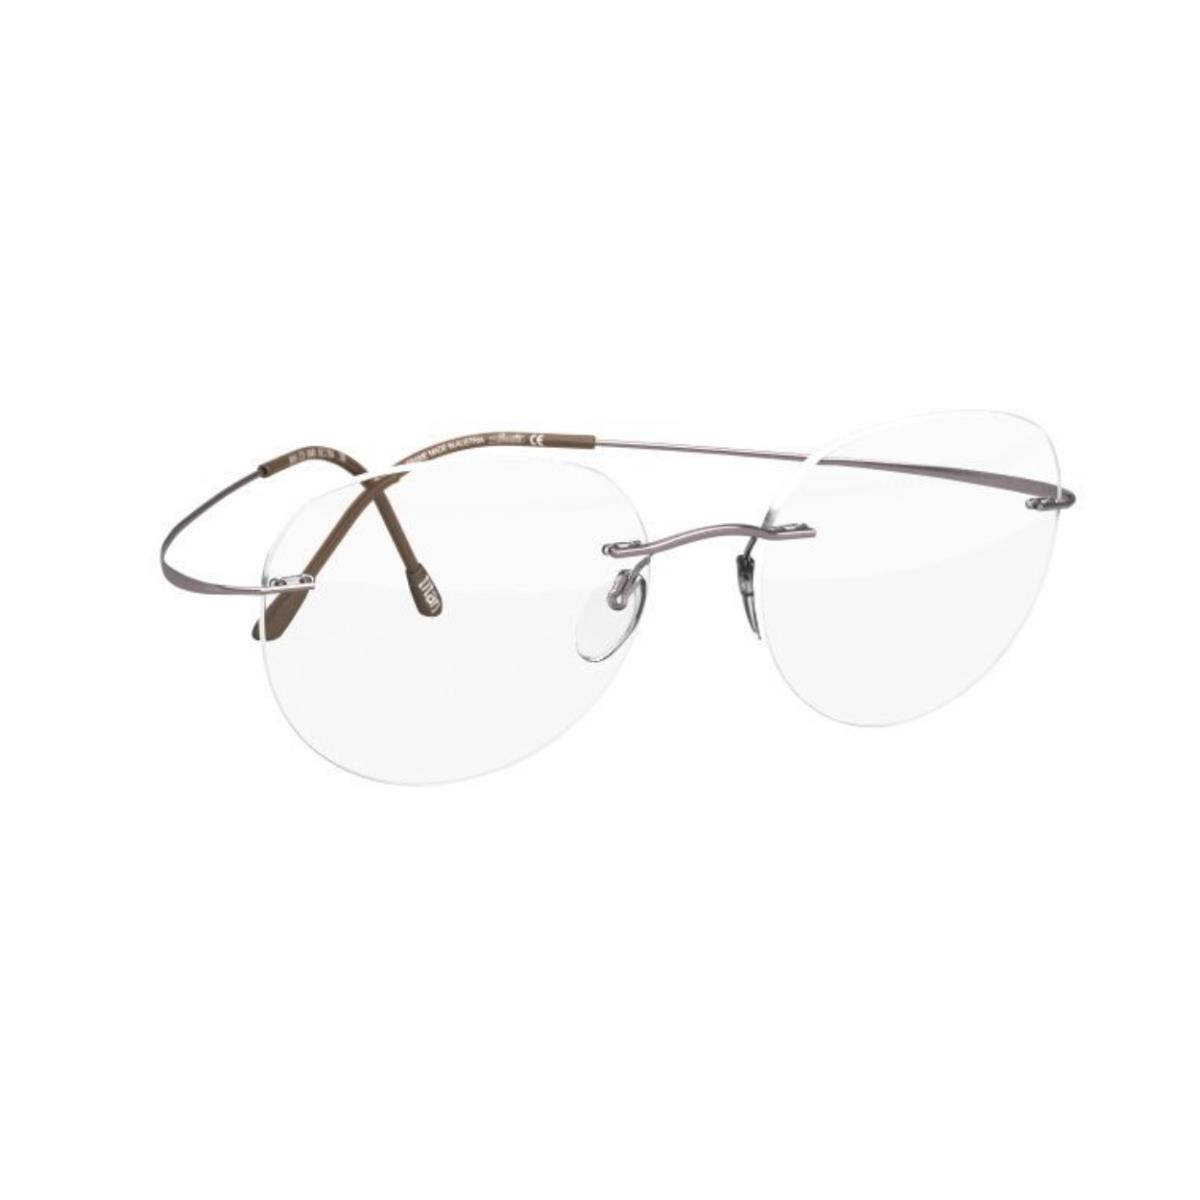 Silhouette Rimless Eyeglasses Titan Minimal Art The Must Collection Frames SILVER GREY - 7110, SIZE: 48-18 150, SHAPE - CN